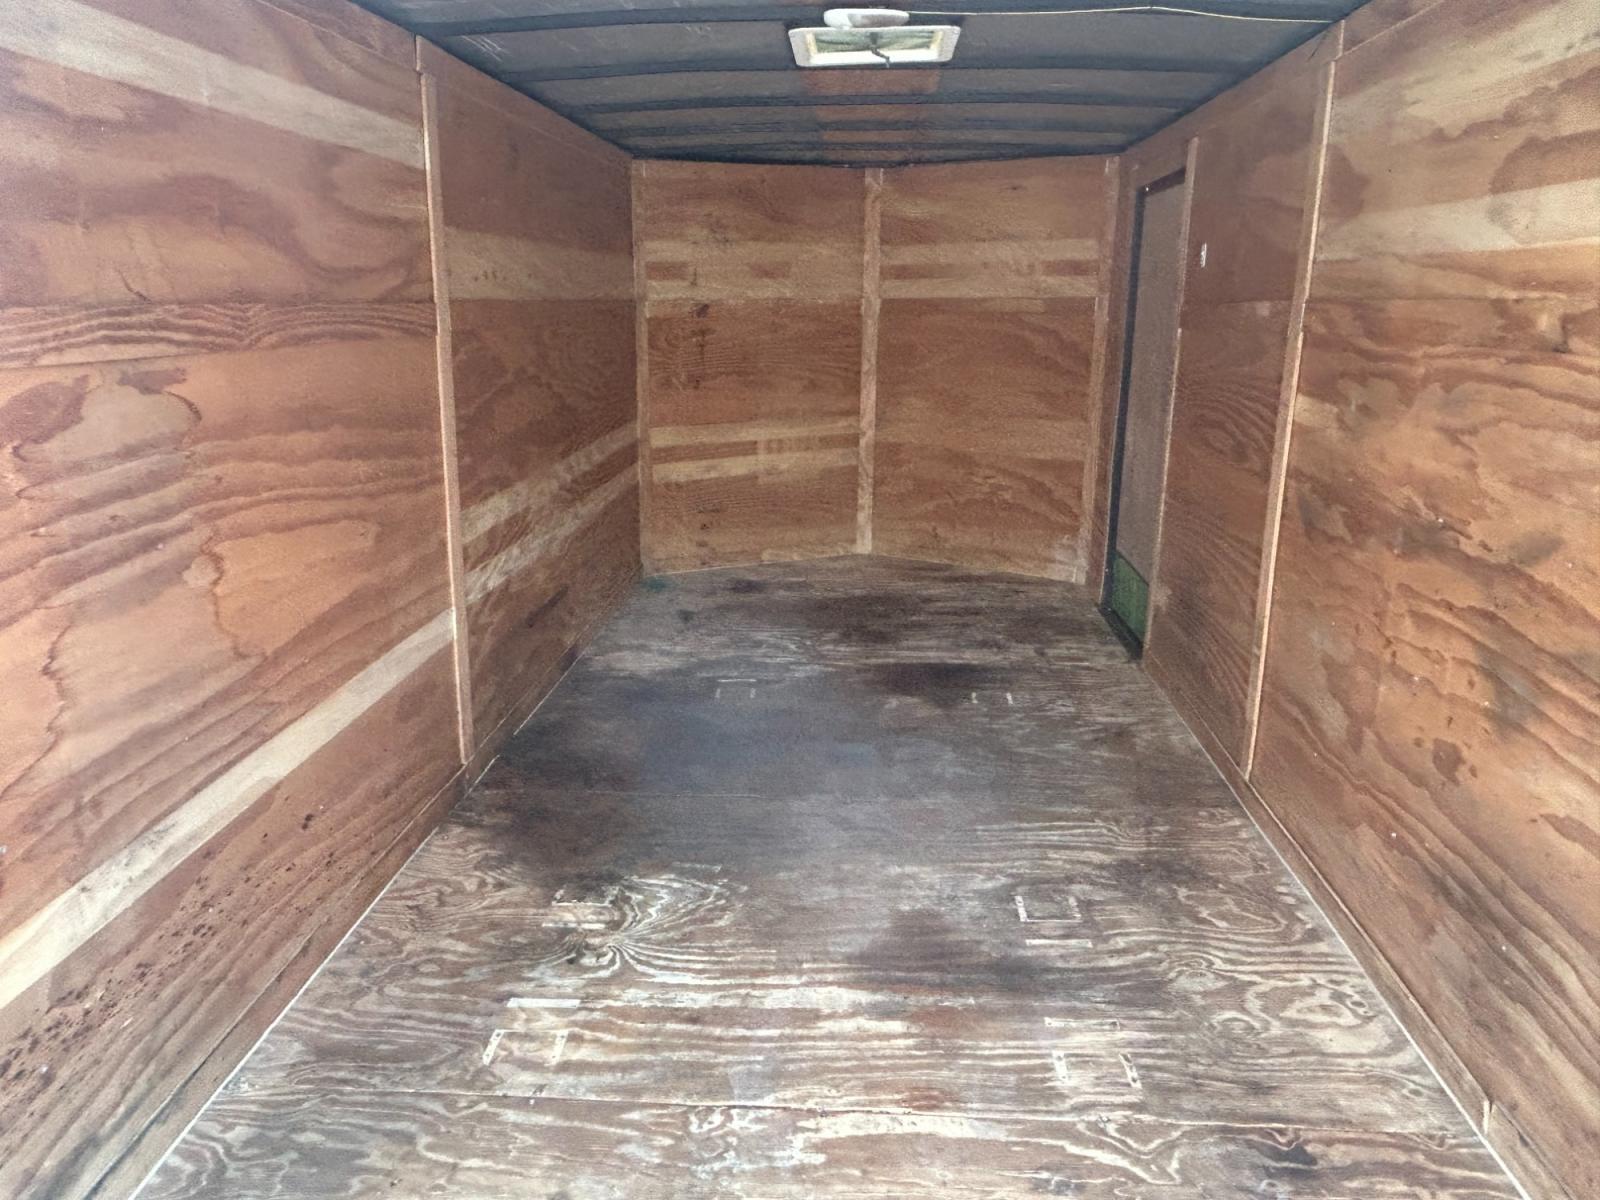 2020 GREEN /TAN DEEP SOUTH ENCLOSED TRAILER (7JKBE1624LH) , located at 17760 Hwy 62, Morris, OK, 74445, 35.609104, -95.877060 - 2020 DEEP SOUTH ENCLOSED TRAILER. THIS TRAILER IS 12 X 6.5 FT. ***MINOR DAMAGES AS SHOWN IN PICTURES*** ***WE RECOMMEND THAT THE TIRES TO BE REPLACED*** WE CAN REPLACE THE TIRES FOR AN ADDITIONAL $400 $5,500 - Photo #4